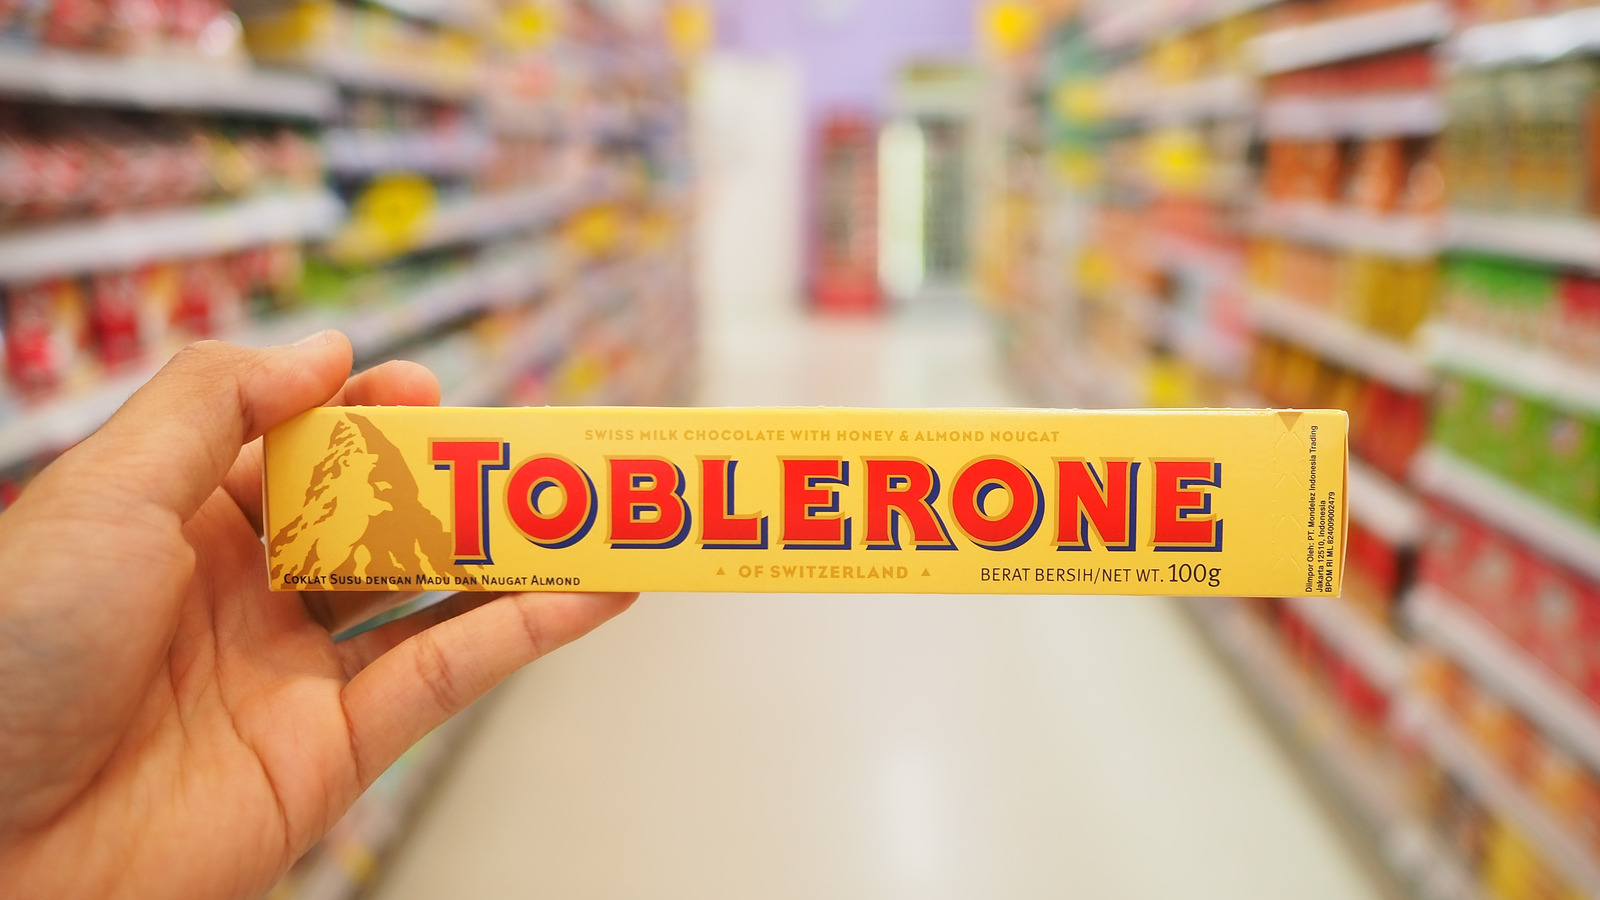 The Way Toblerone Is Made Is Changing — Will It Be as Good?